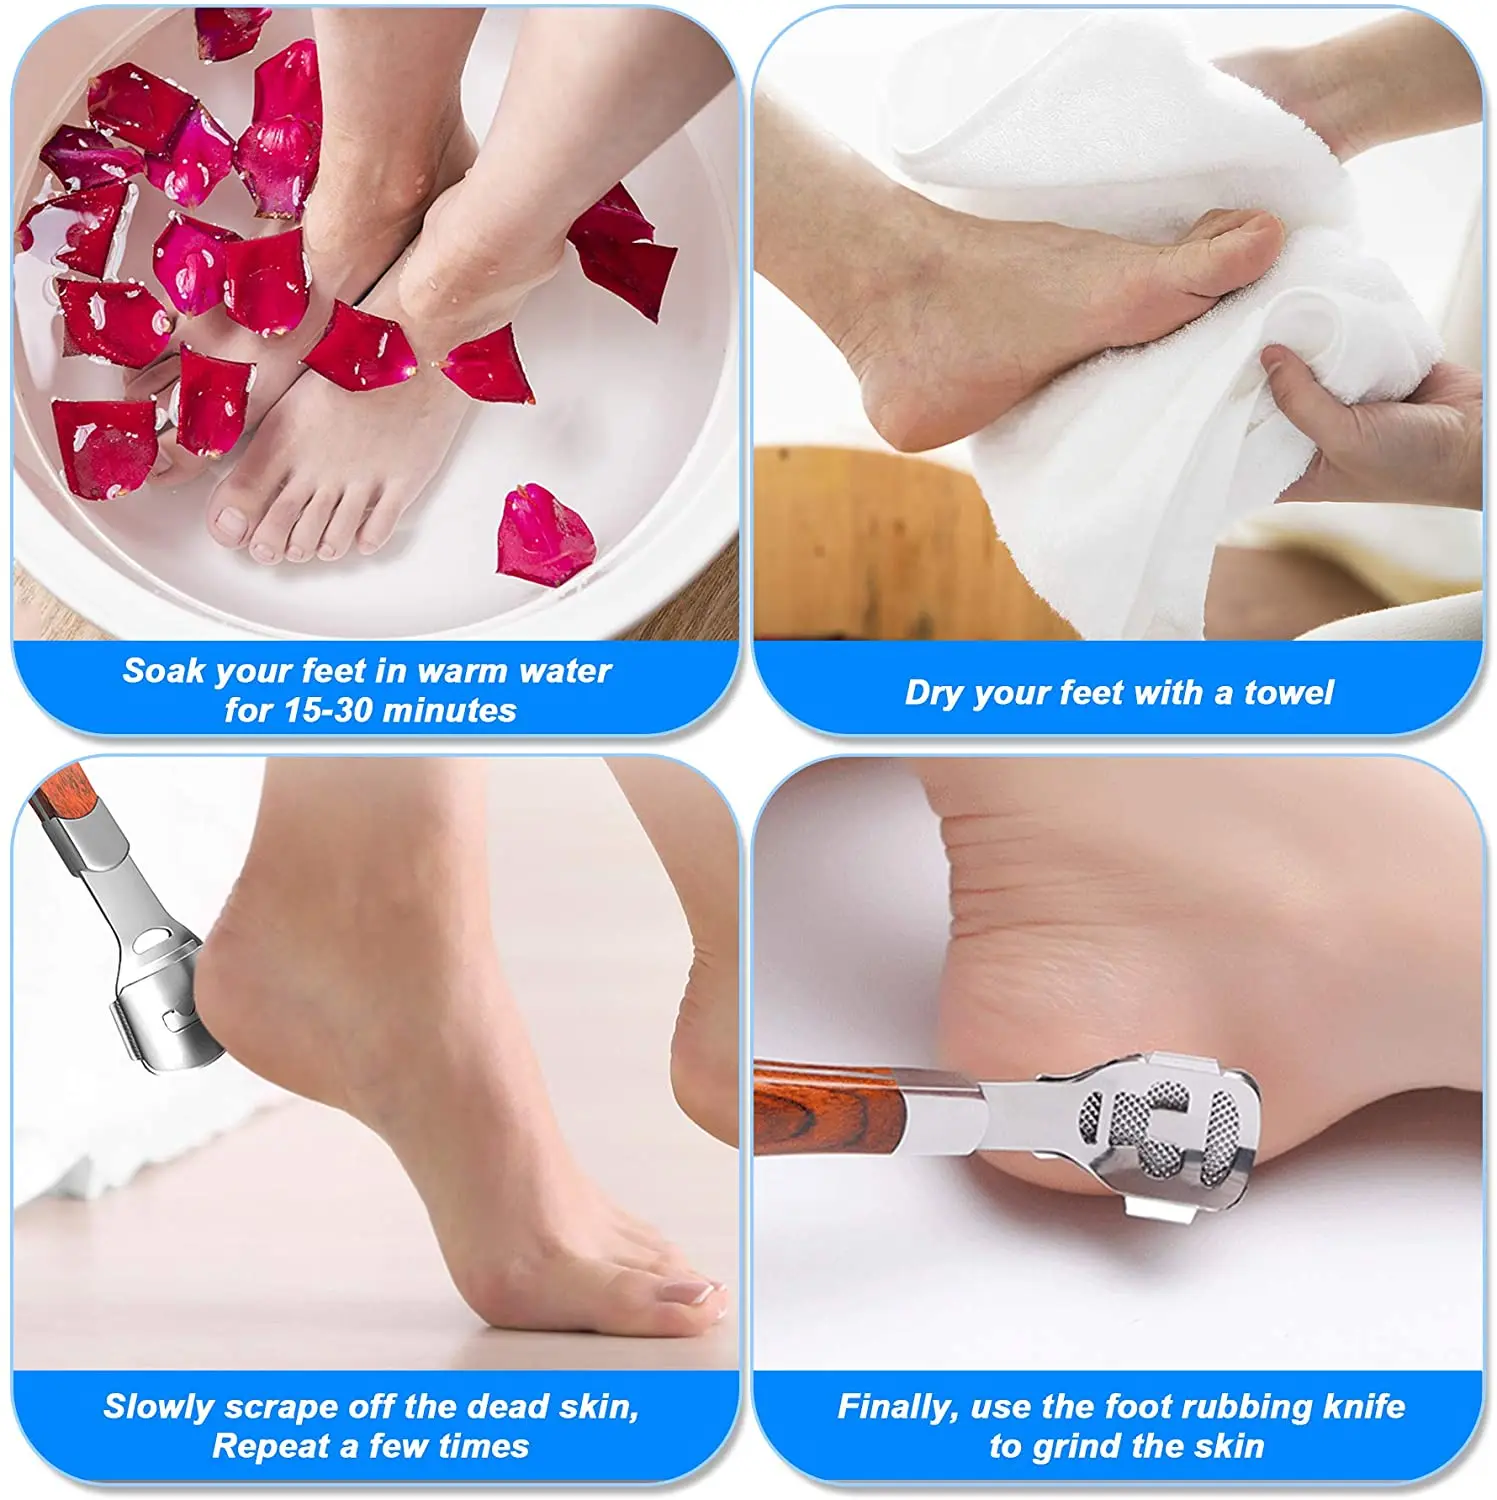 https://ae01.alicdn.com/kf/H5c87281c11304b6cb922f3234dc2b844B/Stainless-Steel-Handle-Pedicure-Callus-Shaver-Foot-File-Care-Hard-Skin-Remover-with-Case-20-Replacement.jpg